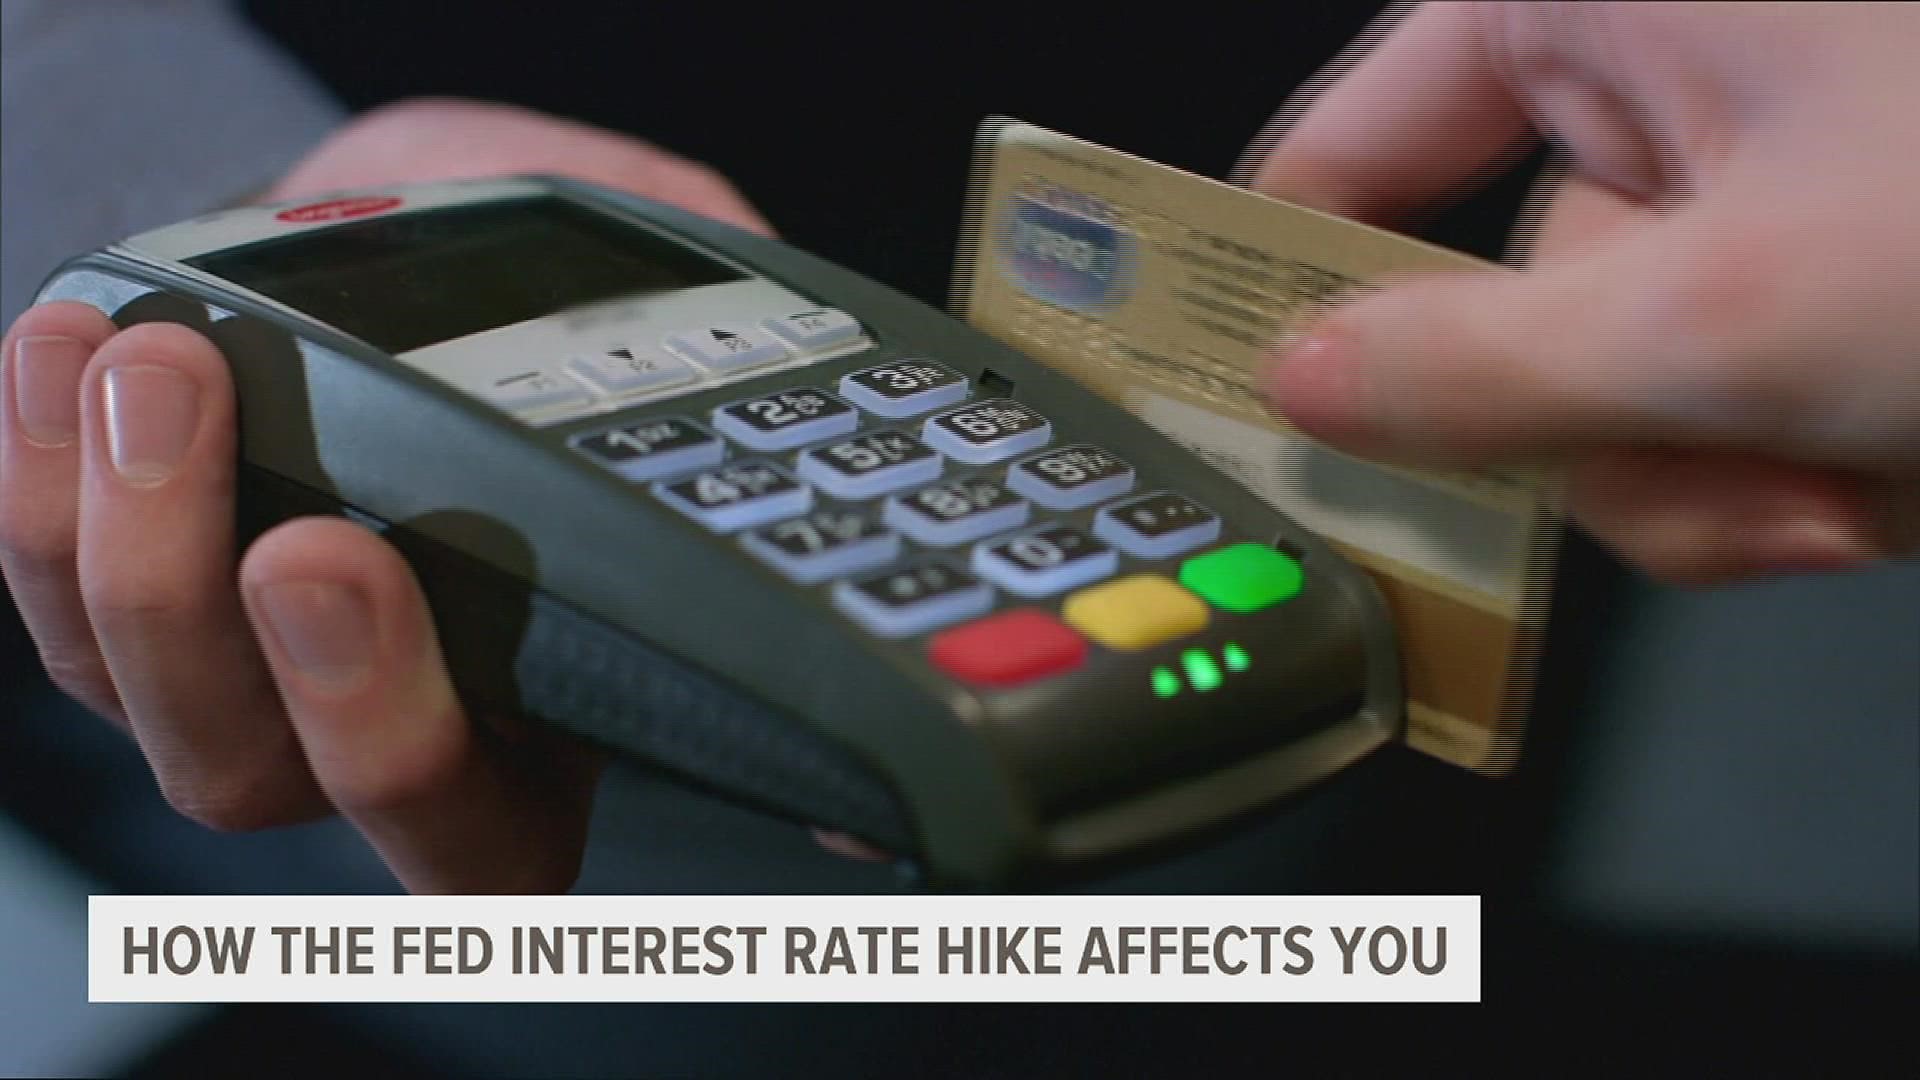 Bettendorf financial experts explain what the Federal Reserve's interest rate hike means for the economy and your bottom line.